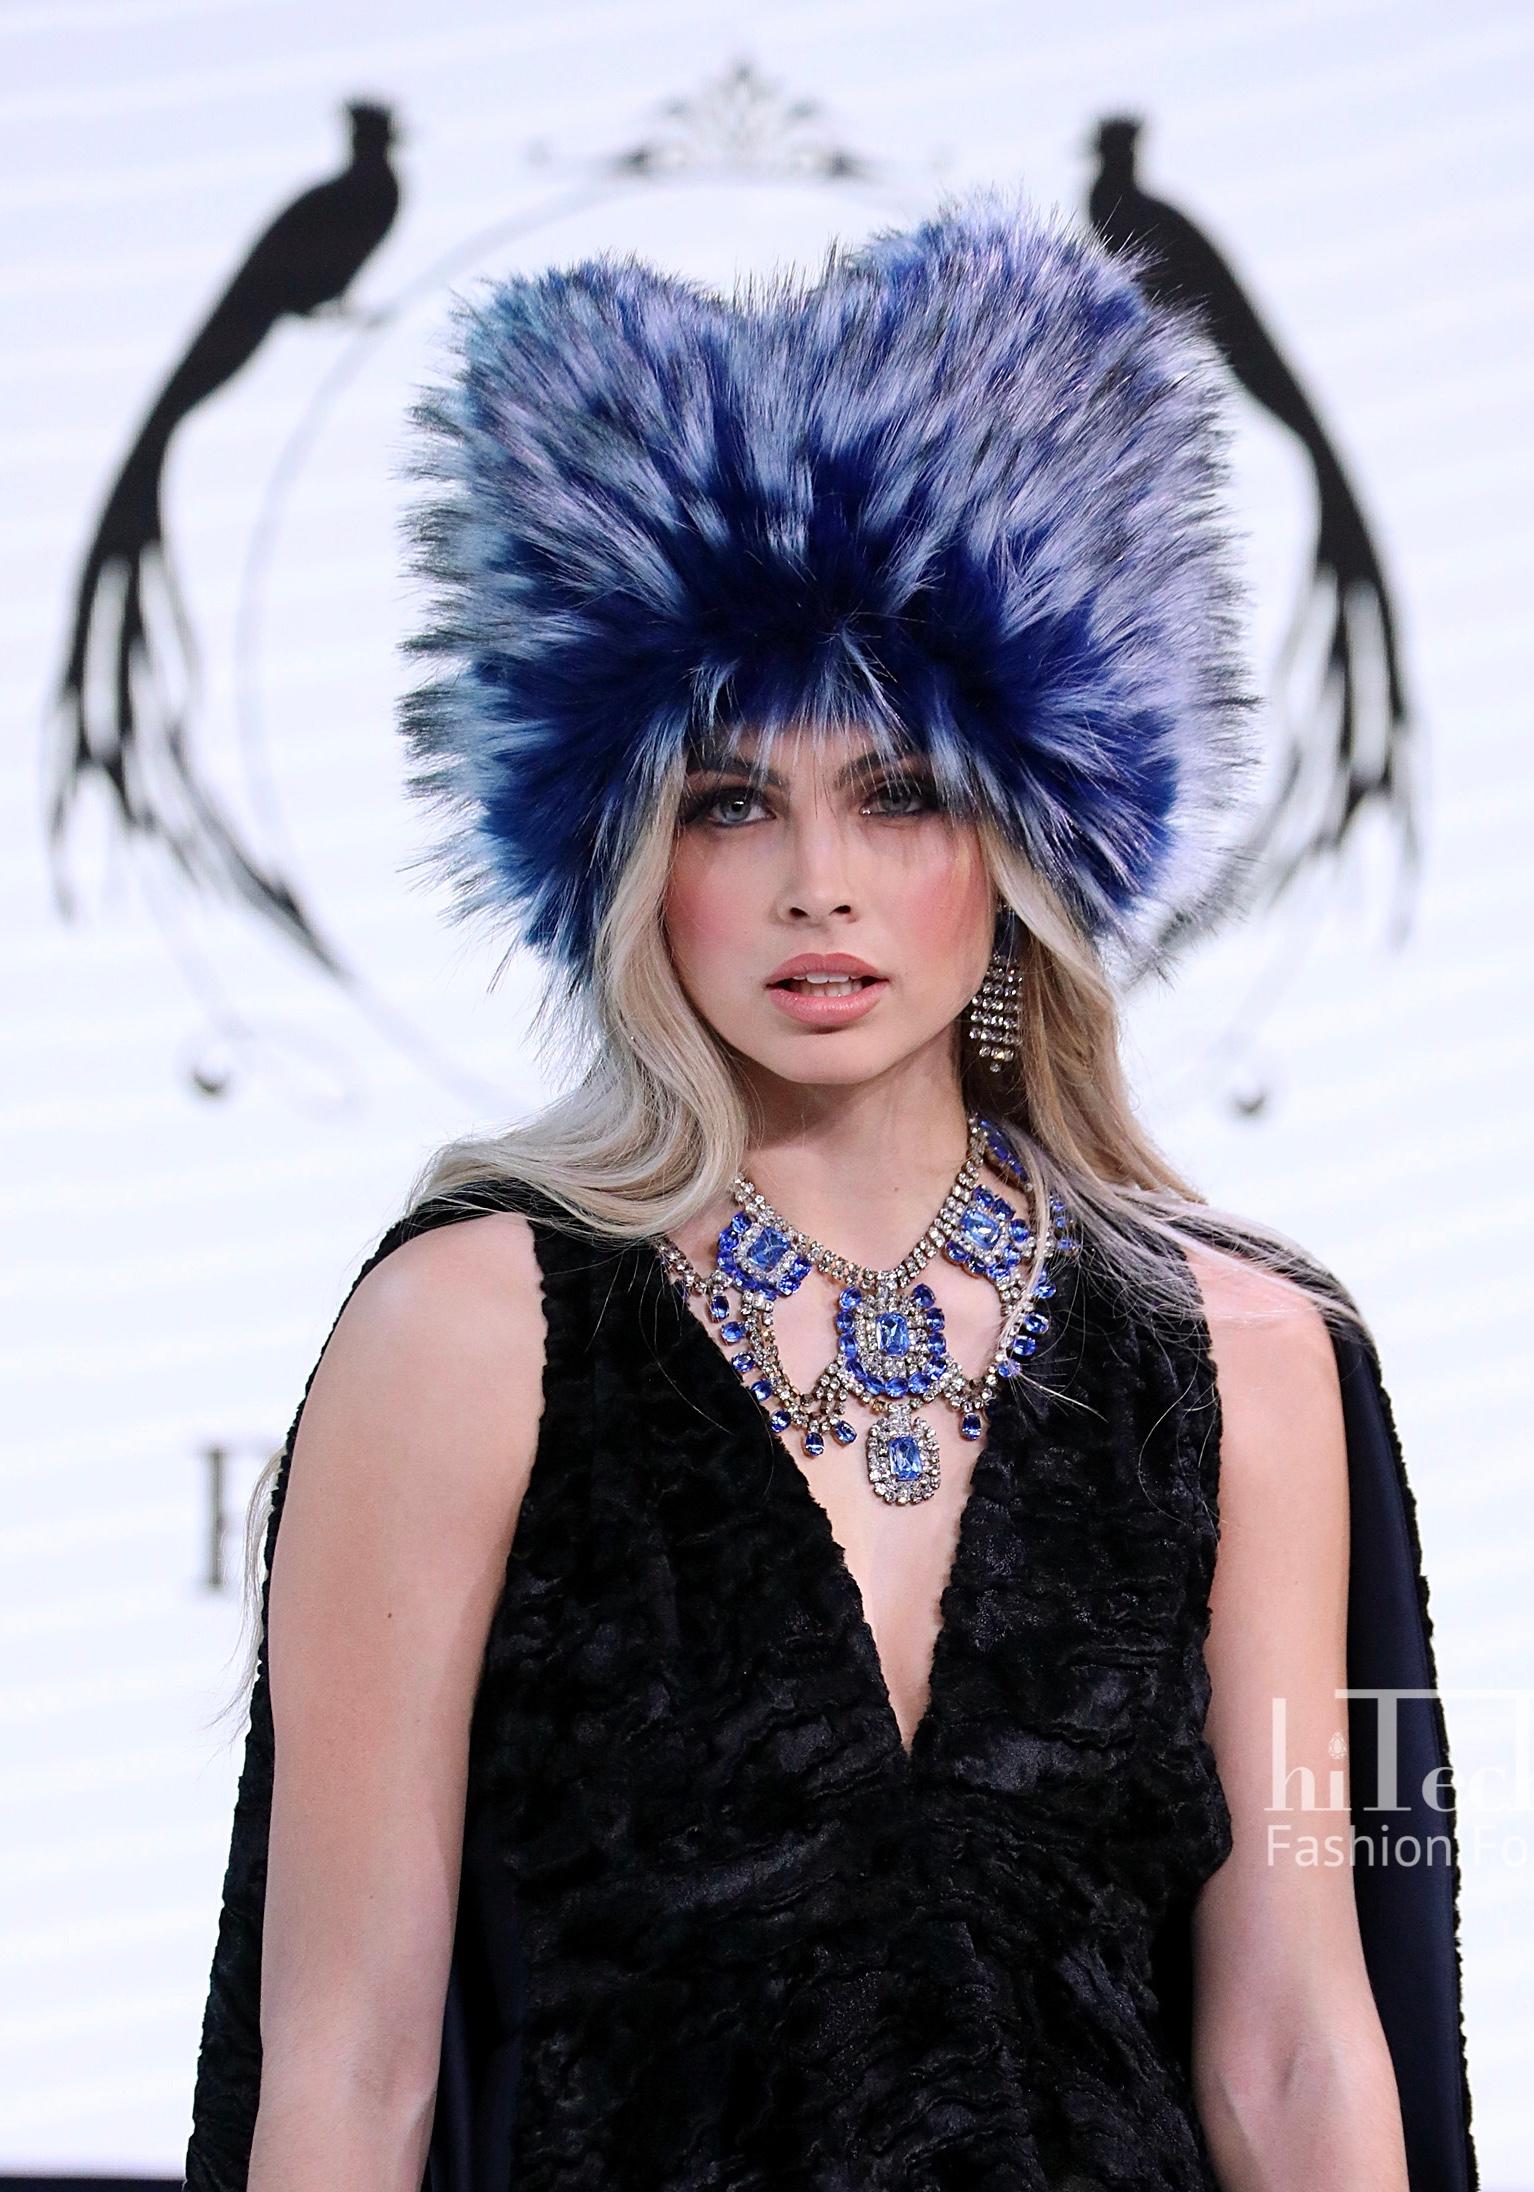 The Anastasia Pelush cobalt blue faux fur fox hat is a one of a kind exclusive piece. Featuring the highest quality man made pelage, this over the top fur free hat makes a striking fashion statement. The beautiful and soft fabric is a stunning